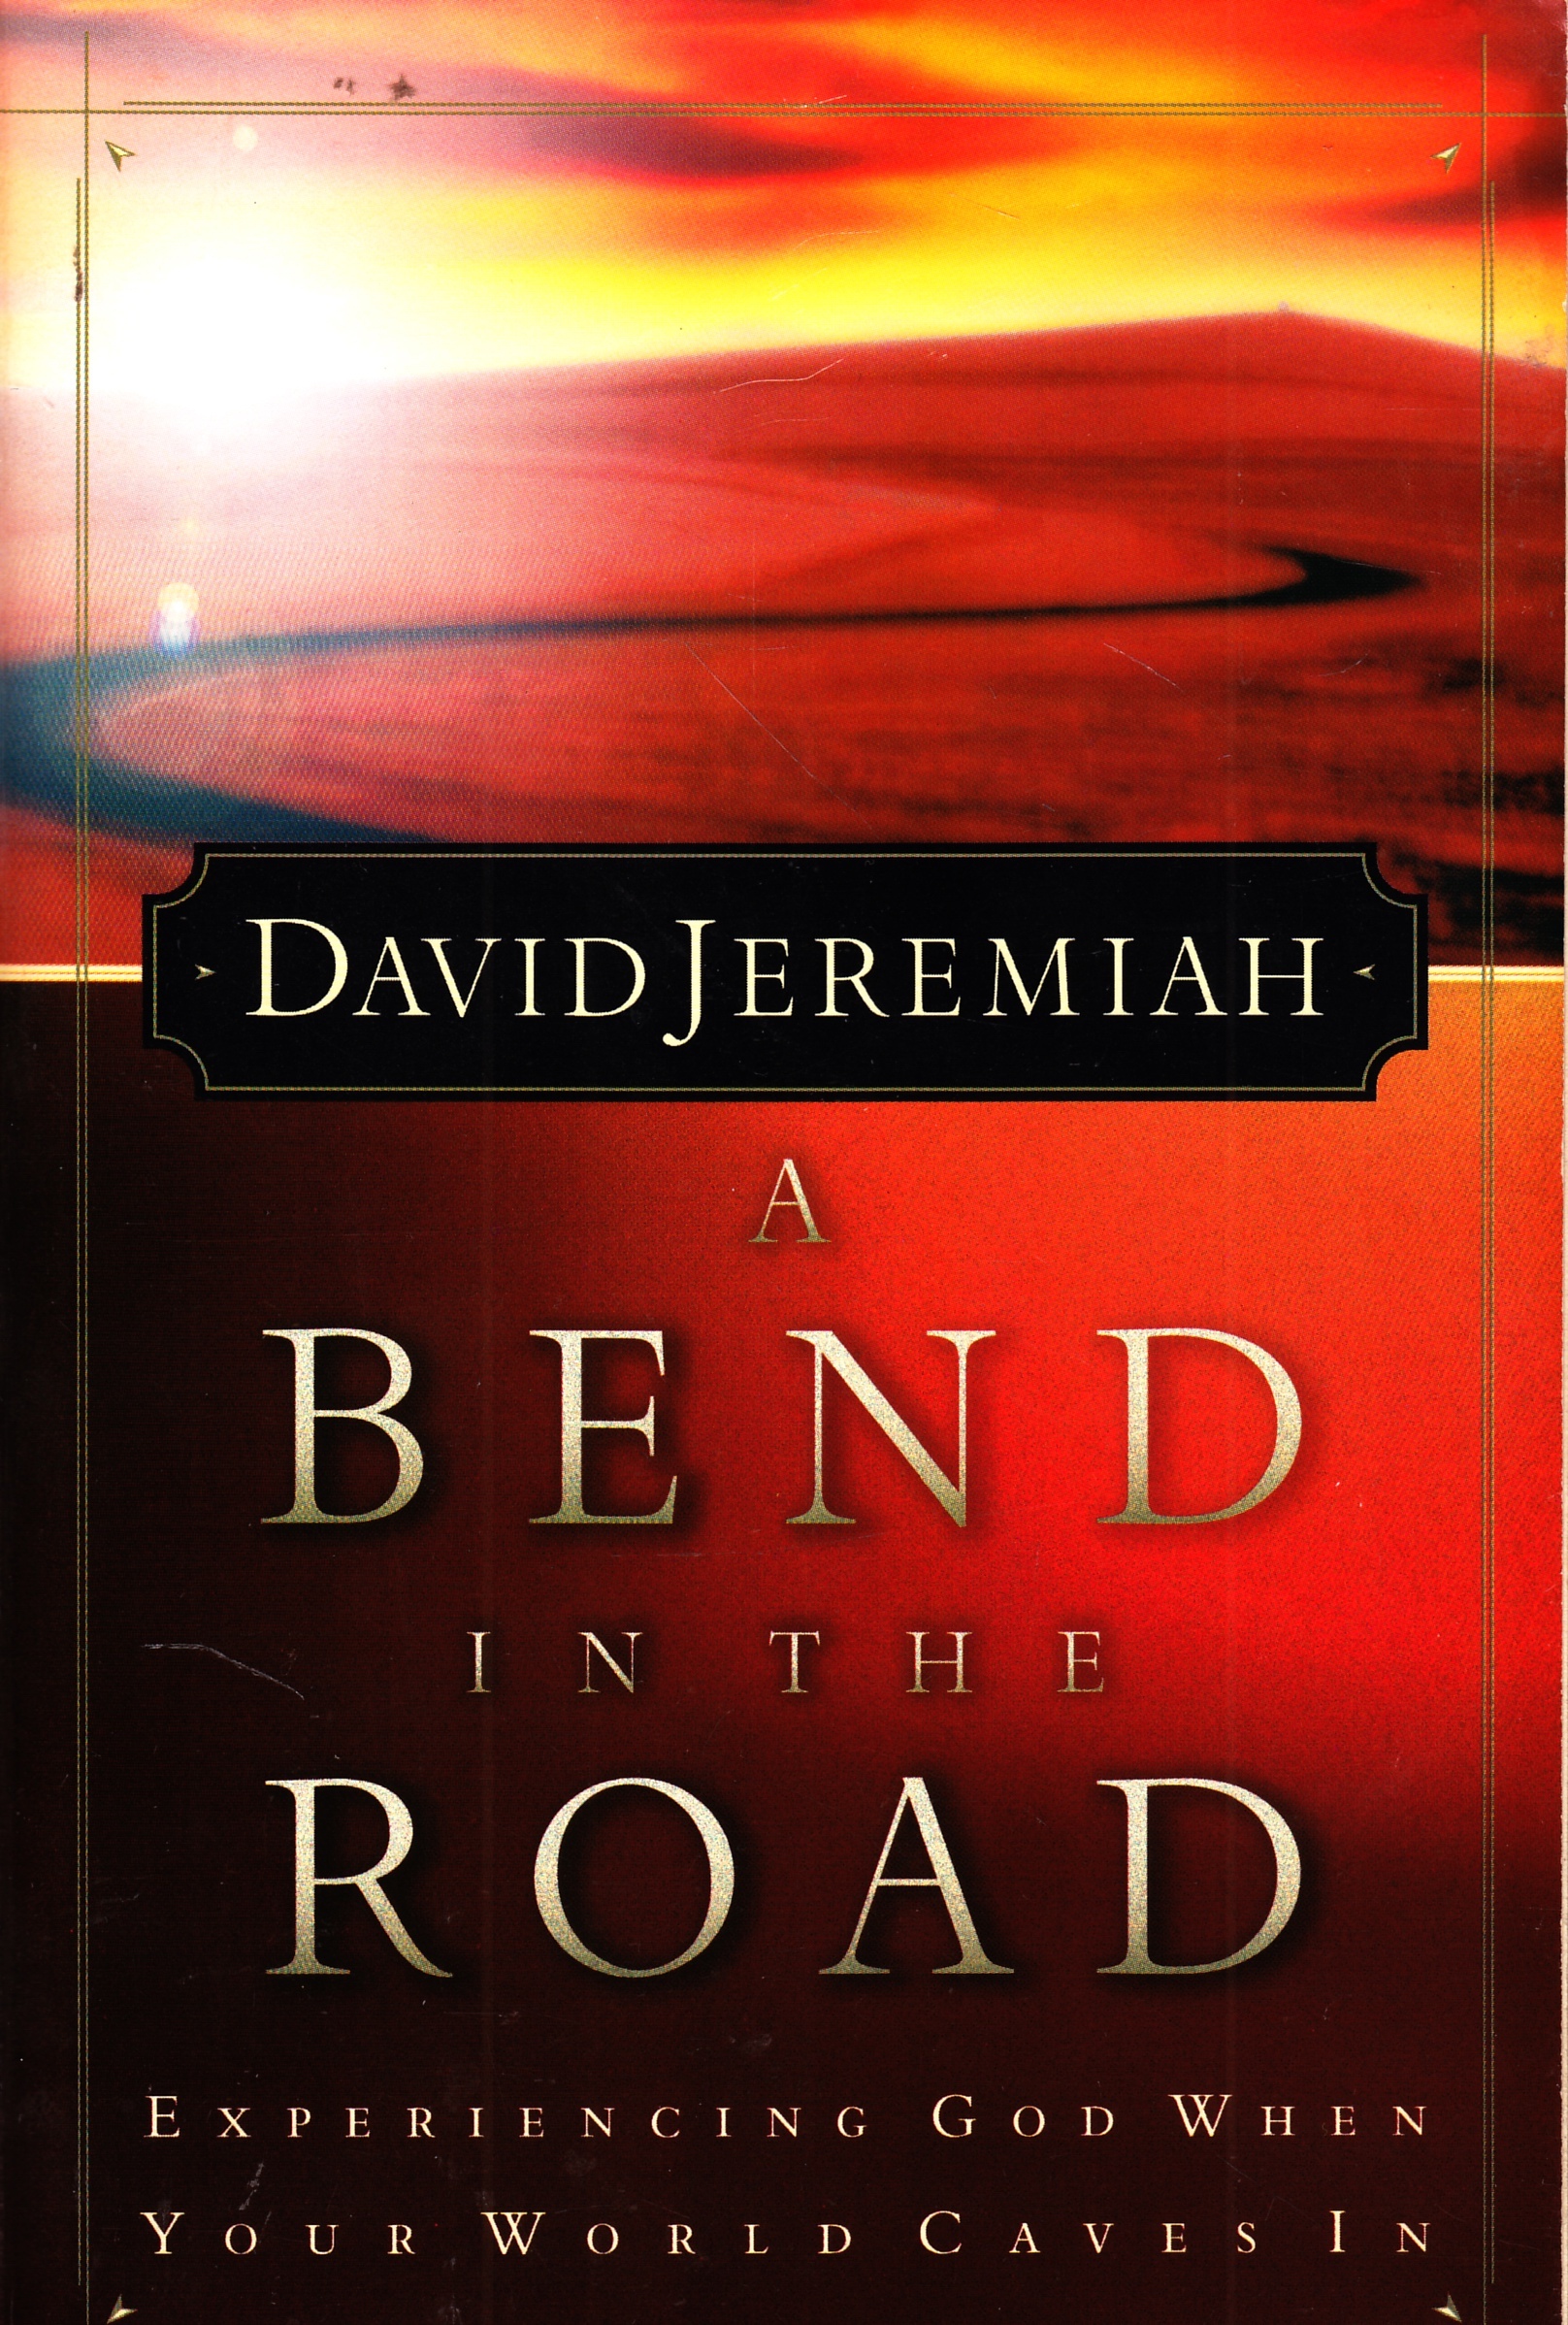 Image for A Bend in the Road Experiencing God when Your World Caves In